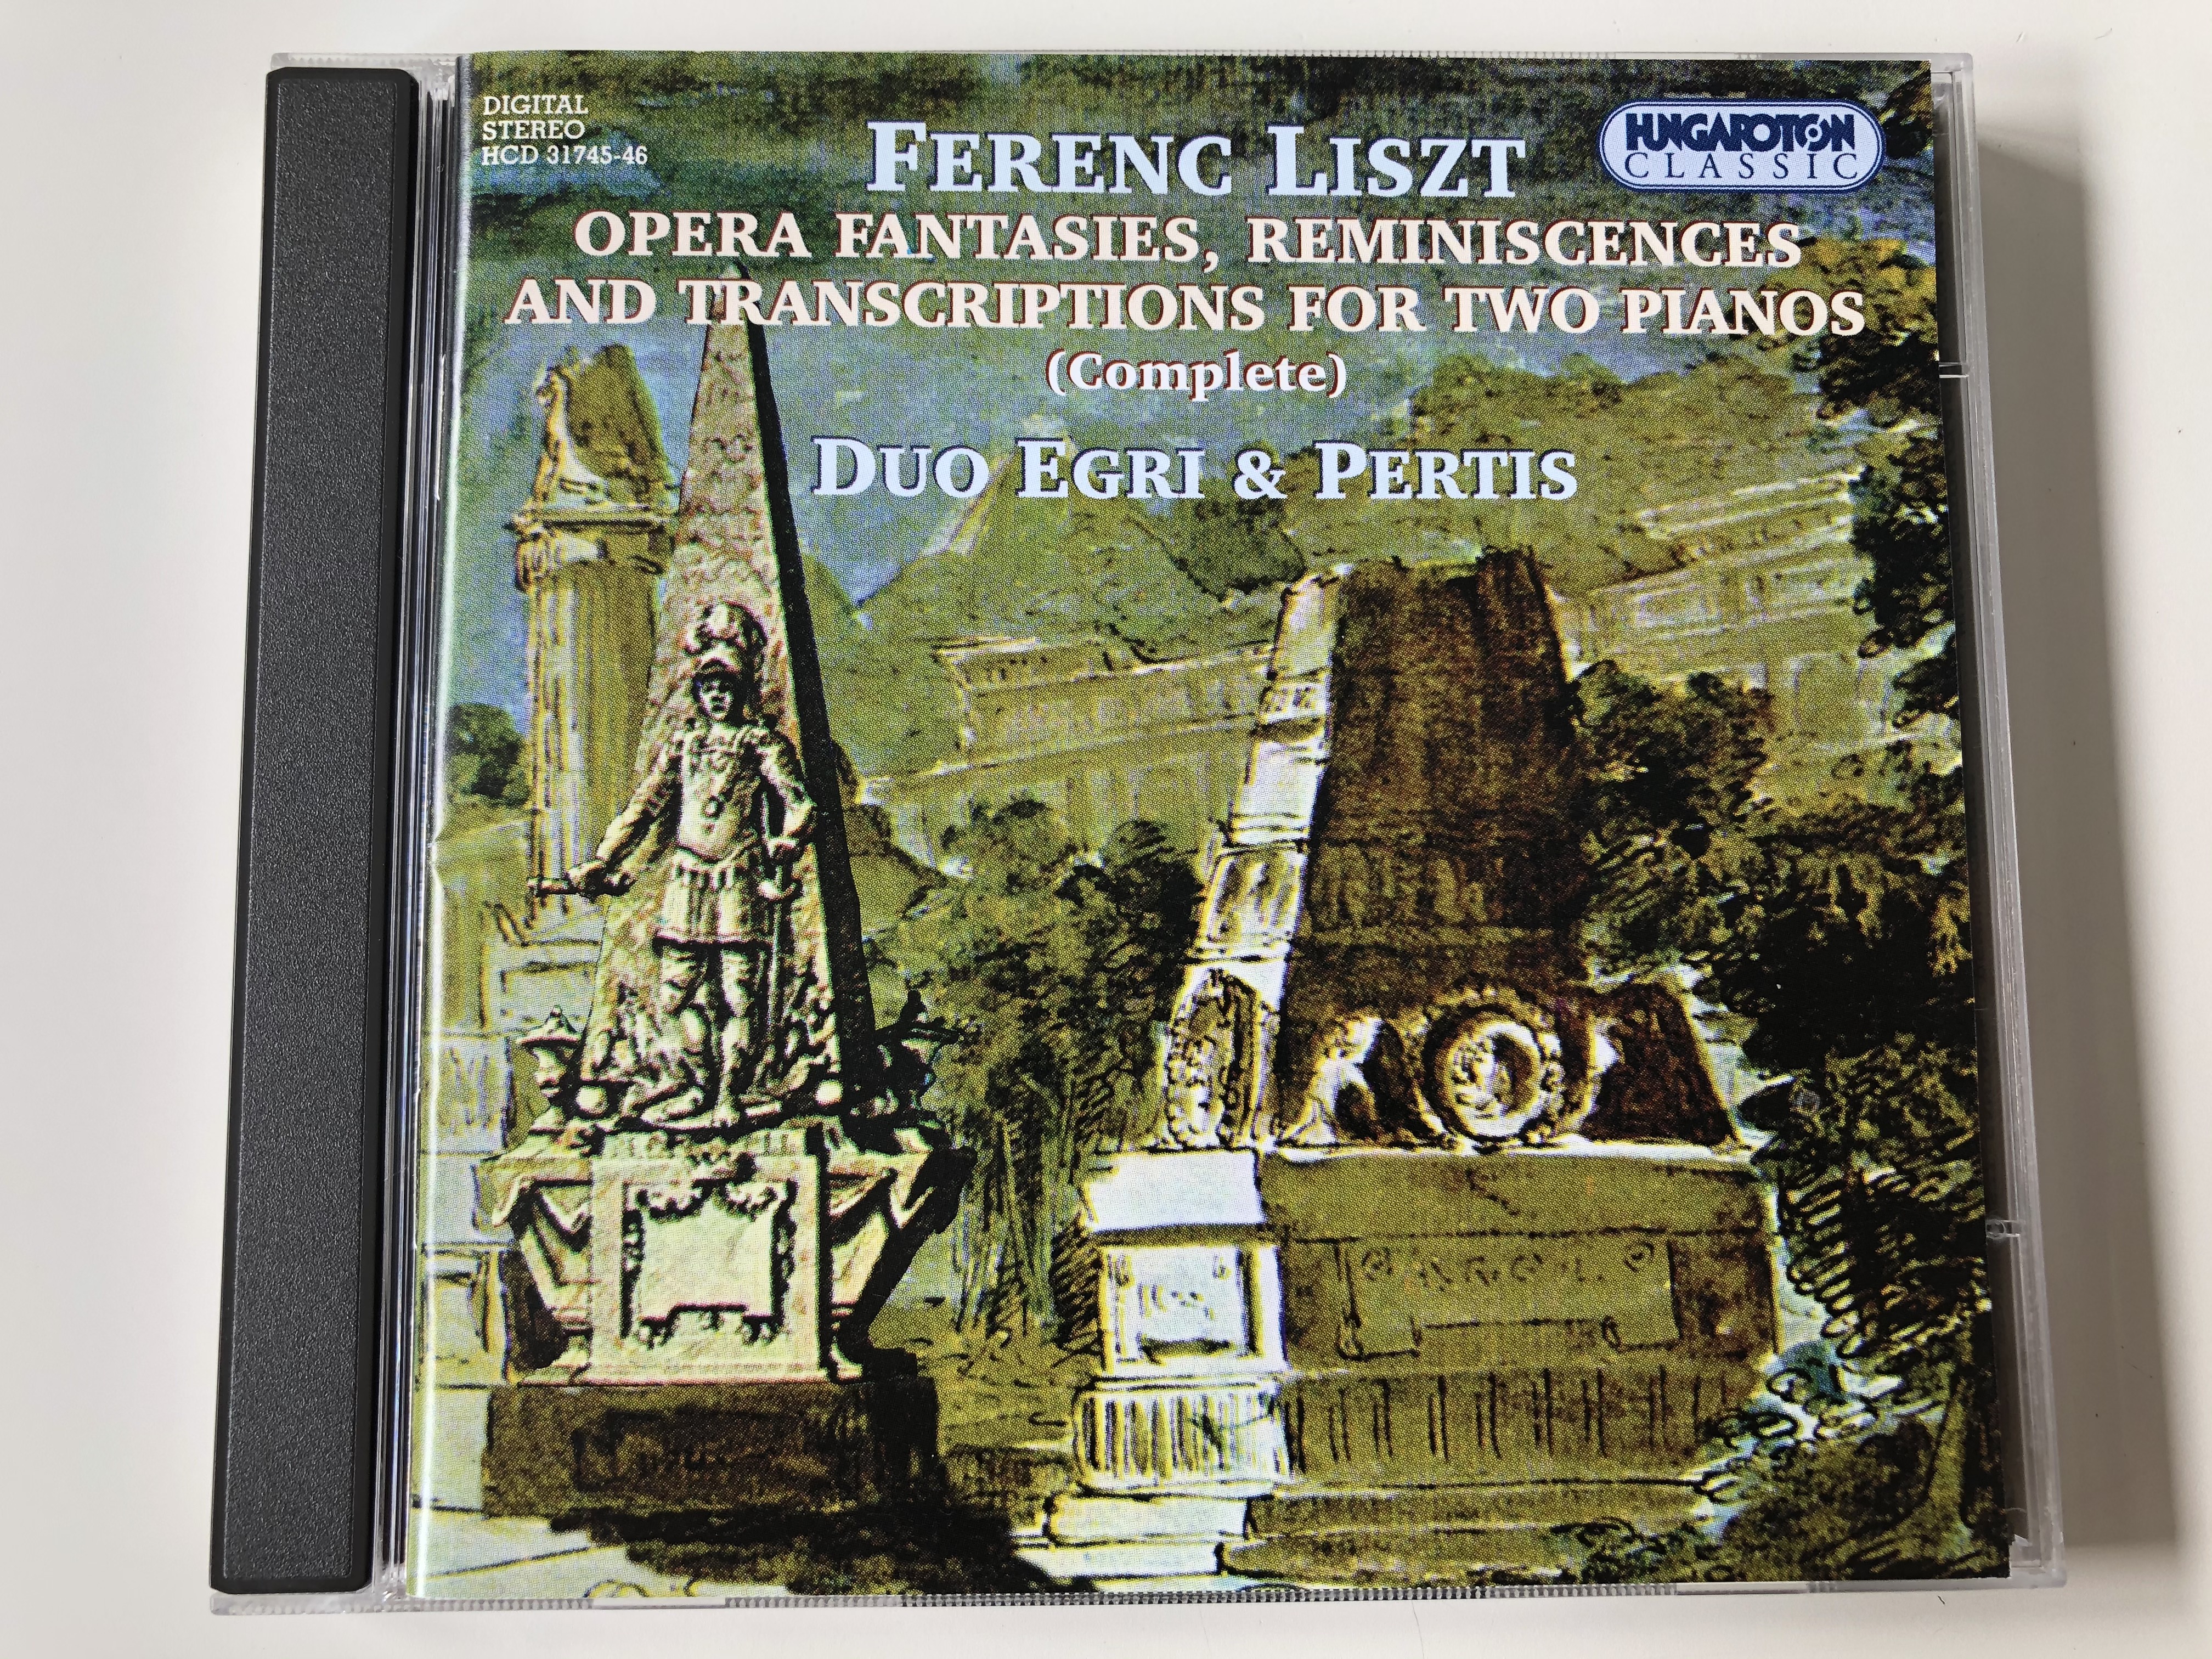 ferenc-liszt-opera-fantasies-reminiscences-and-transcriptions-for-two-pianos-complete-duo-egri-pertis-hungaroton-classic-2x-audio-cd-1998-stereo-hcd-31745-46-1-.jpg